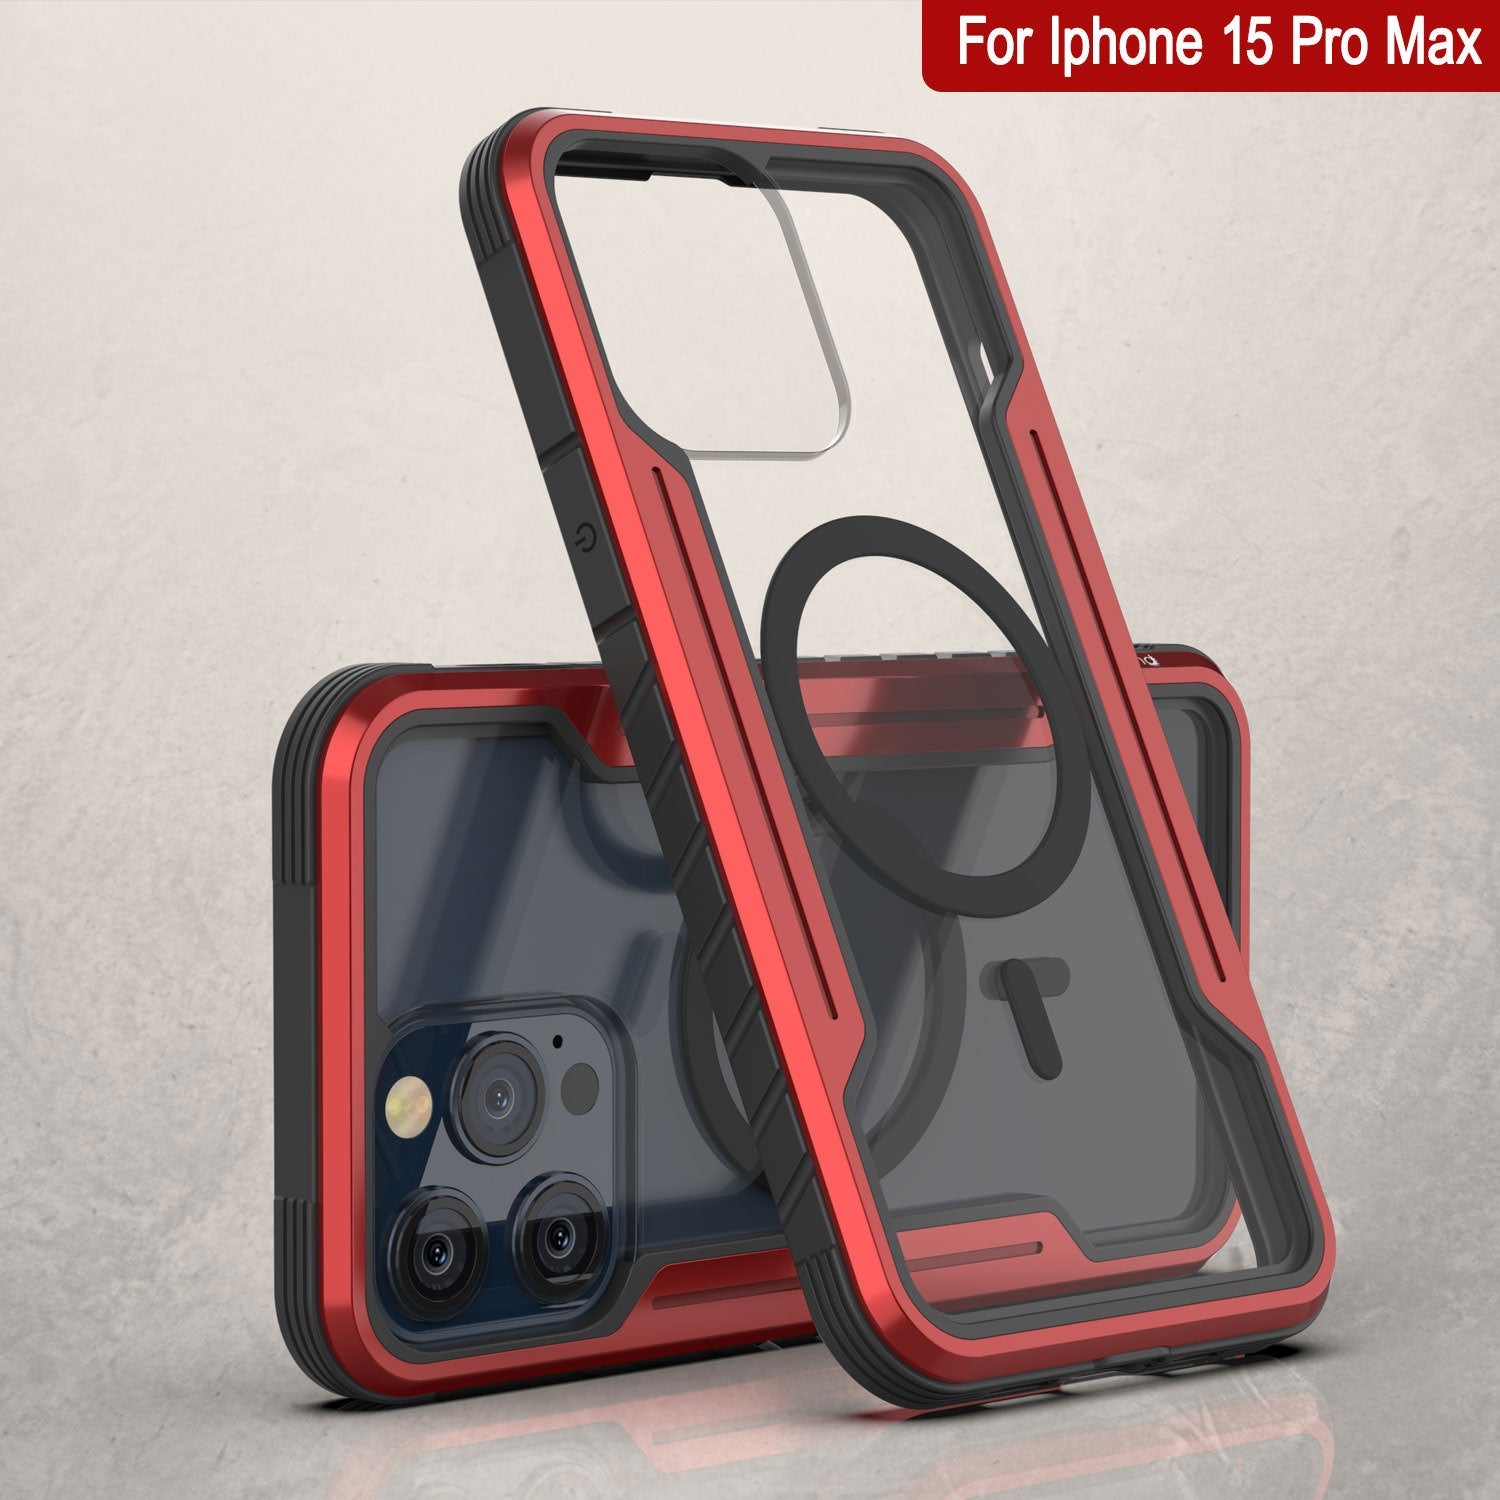 Punkcase iPhone 15 Pro Max Armor Stealth MAG Defense Case Protective Military Grade Multilayer Cover [Red]